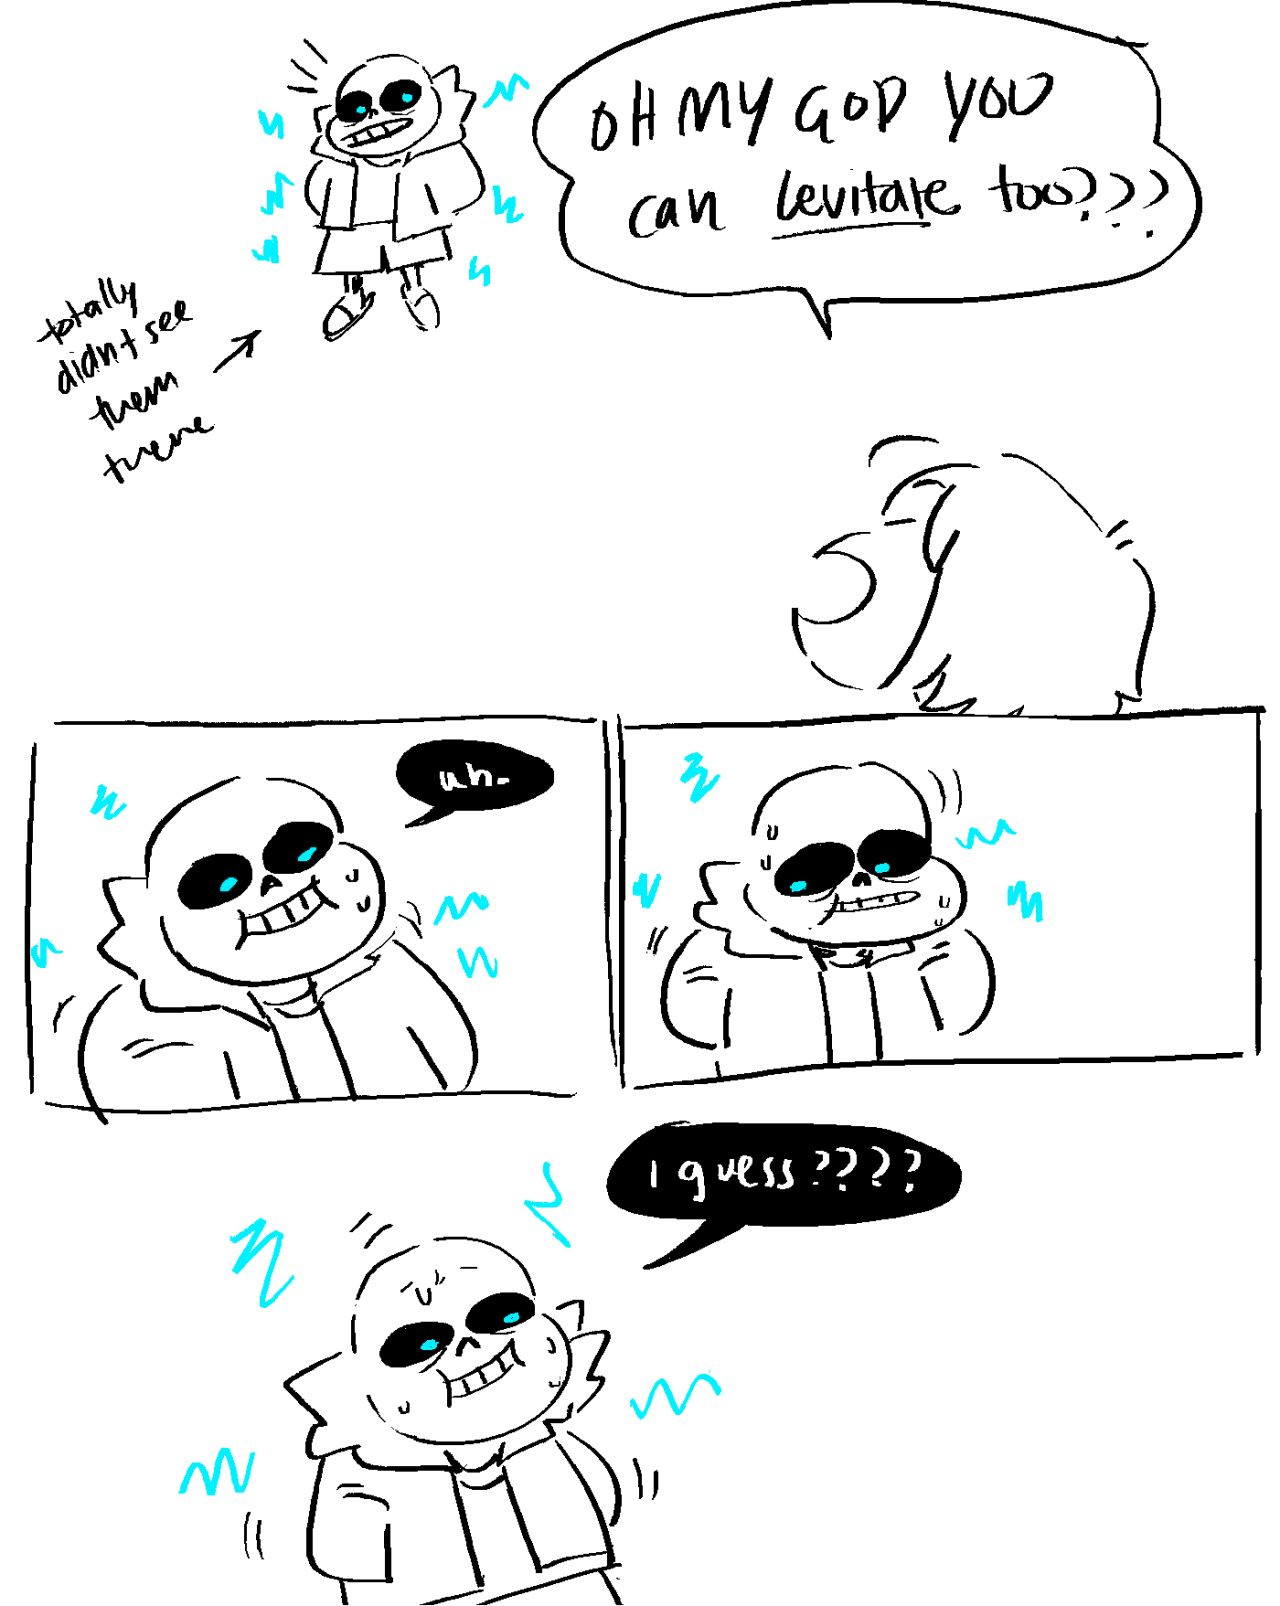 hes usually vry sneaky but not 2day apparently sans cant fly&ndash; but he can